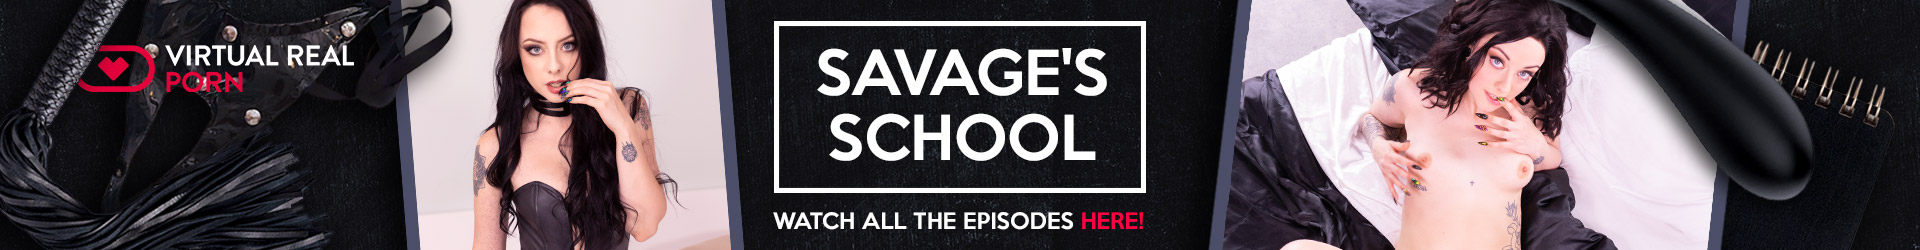 Savage's School - Watch all the episodes 